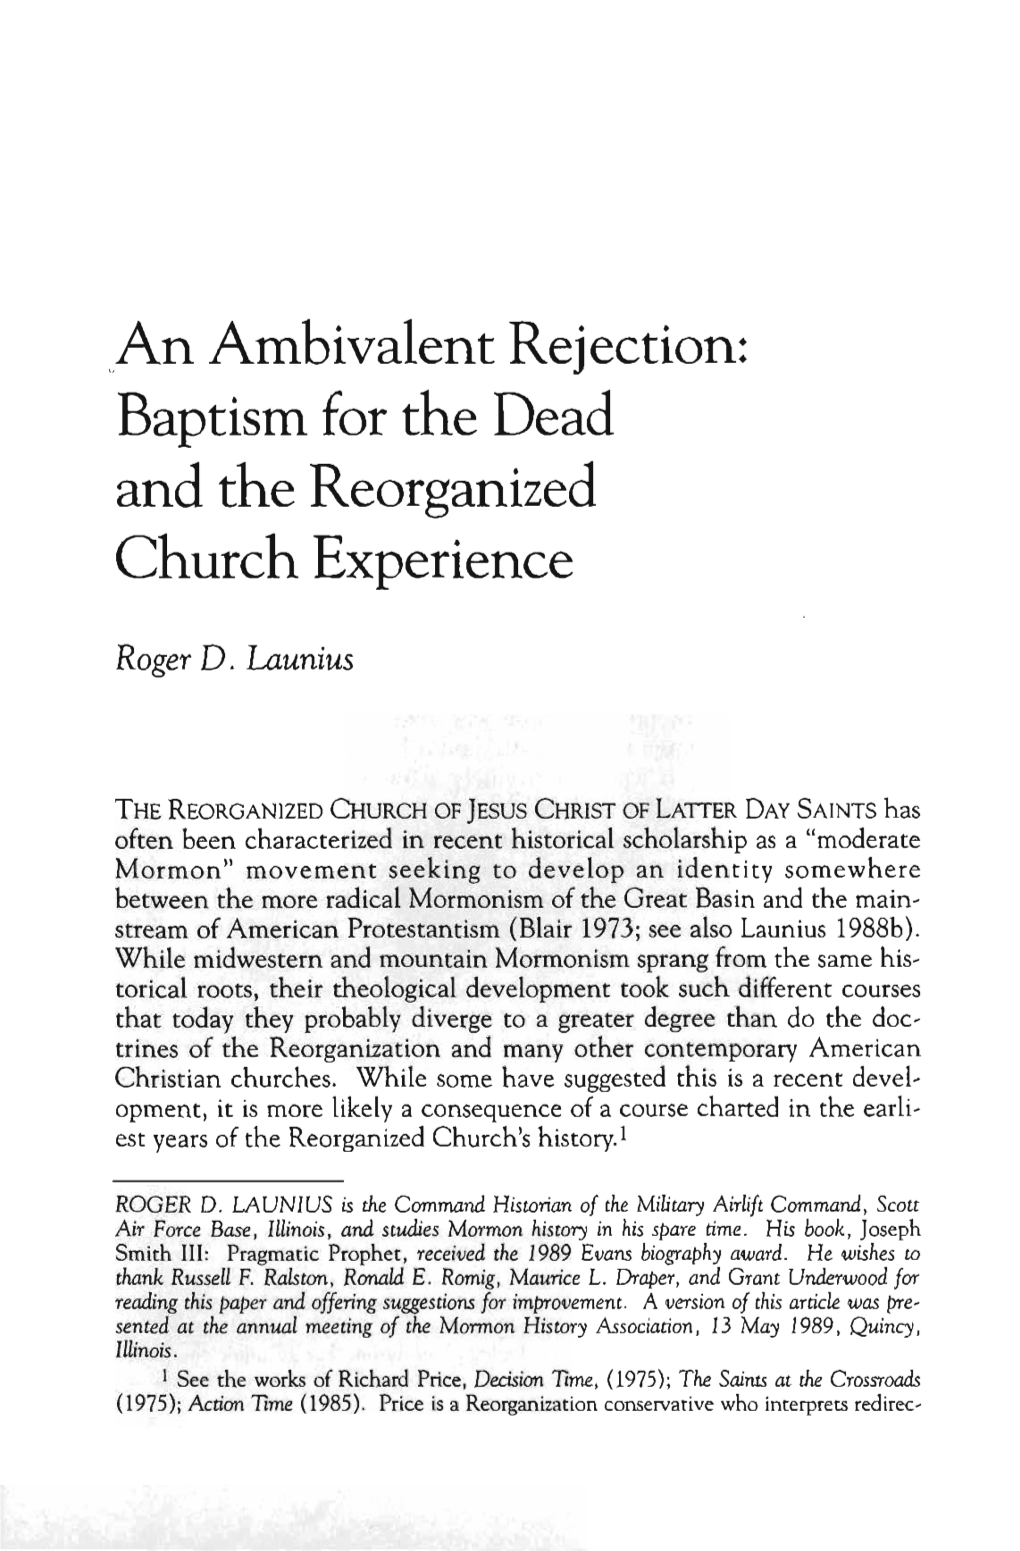 An Ambivalent Rejection: Baptism for the Dead and the Reorganized Church Experience